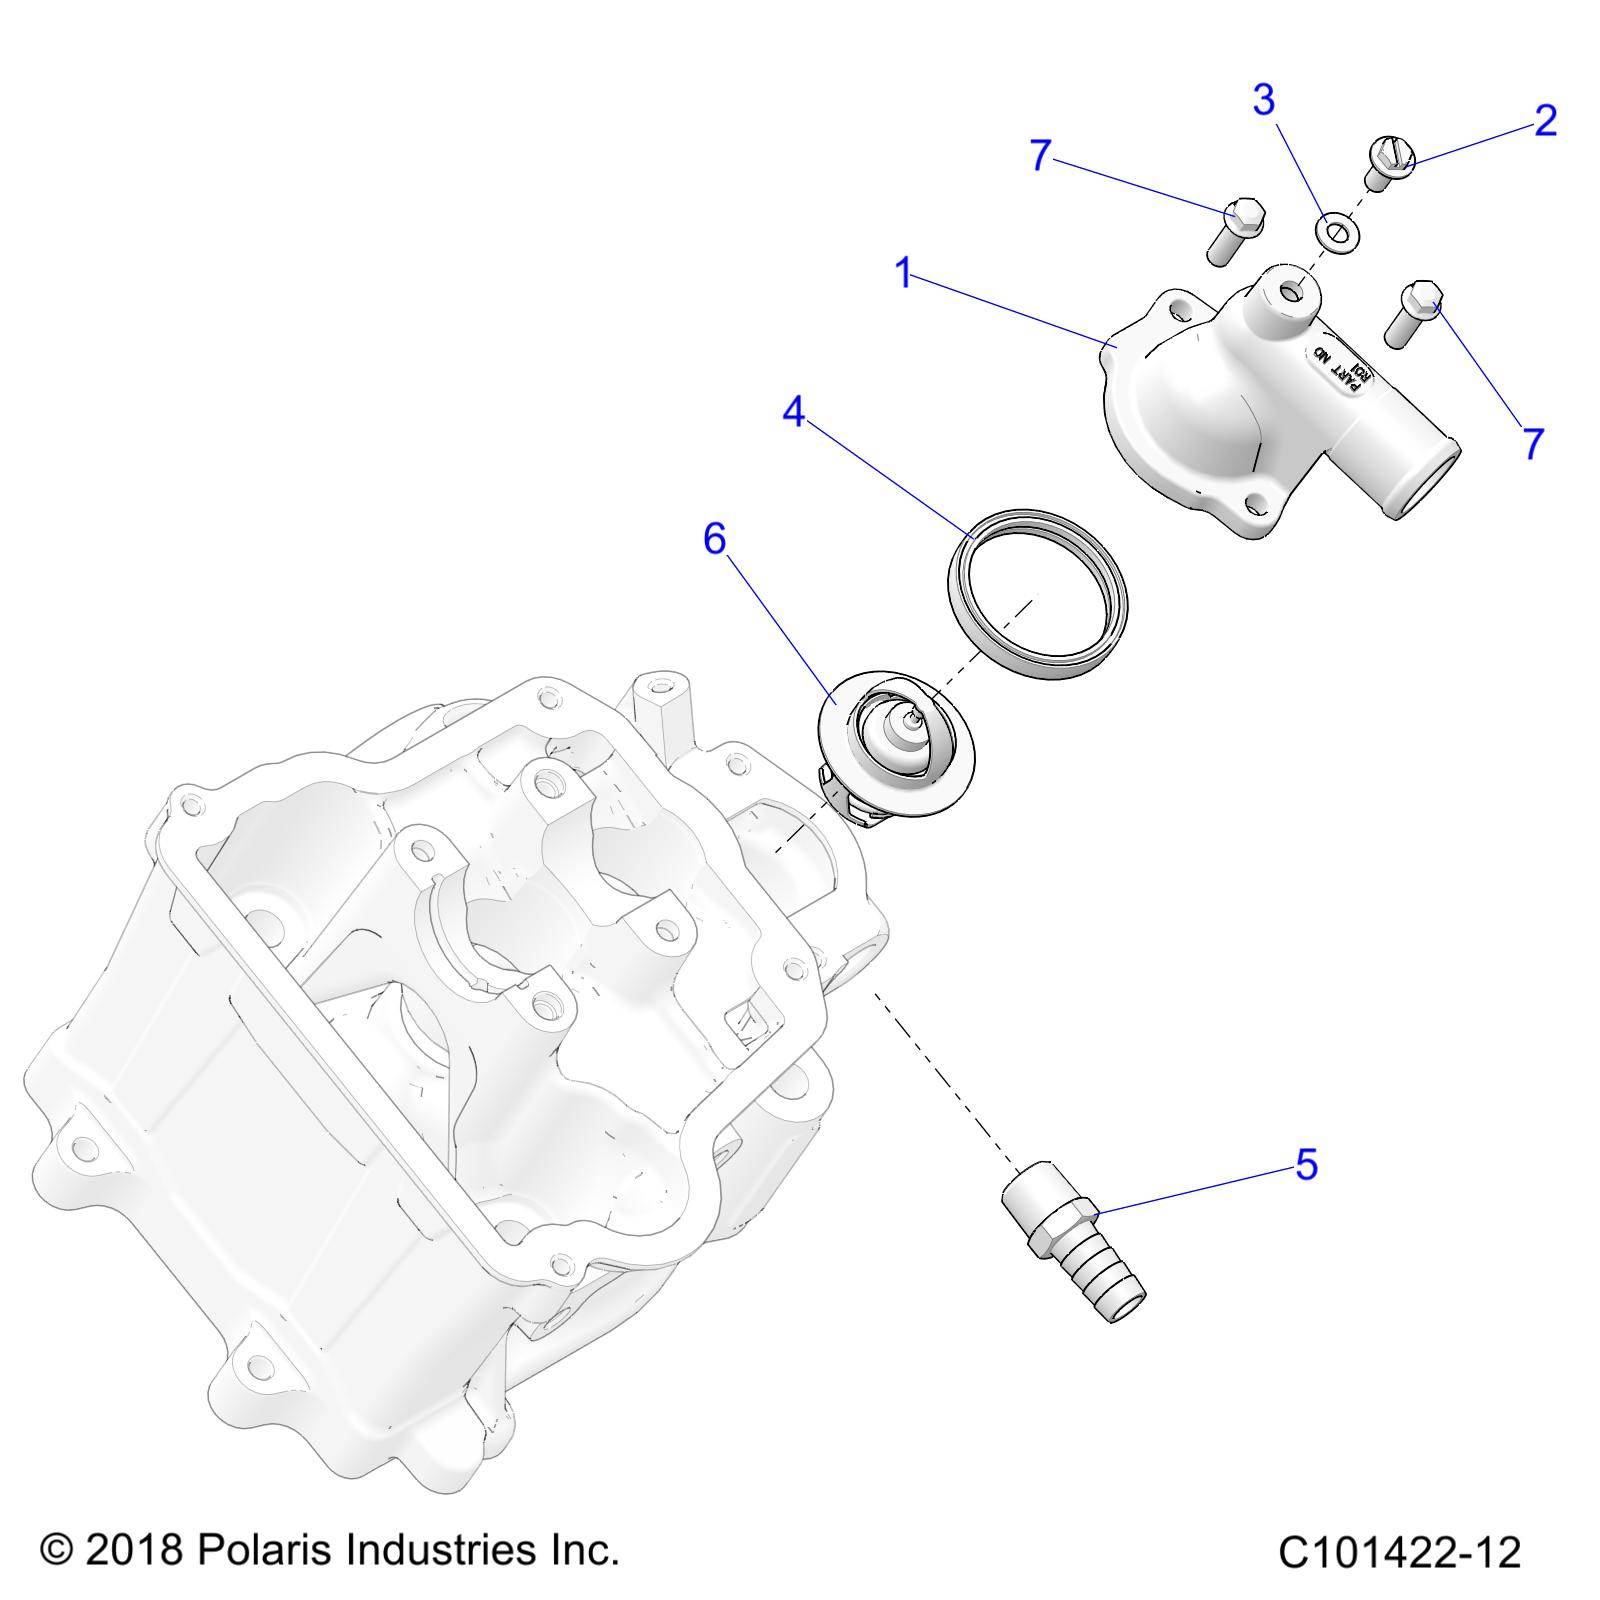 ENGINE, THERMOSTAT and COVER - A19SAA50D5